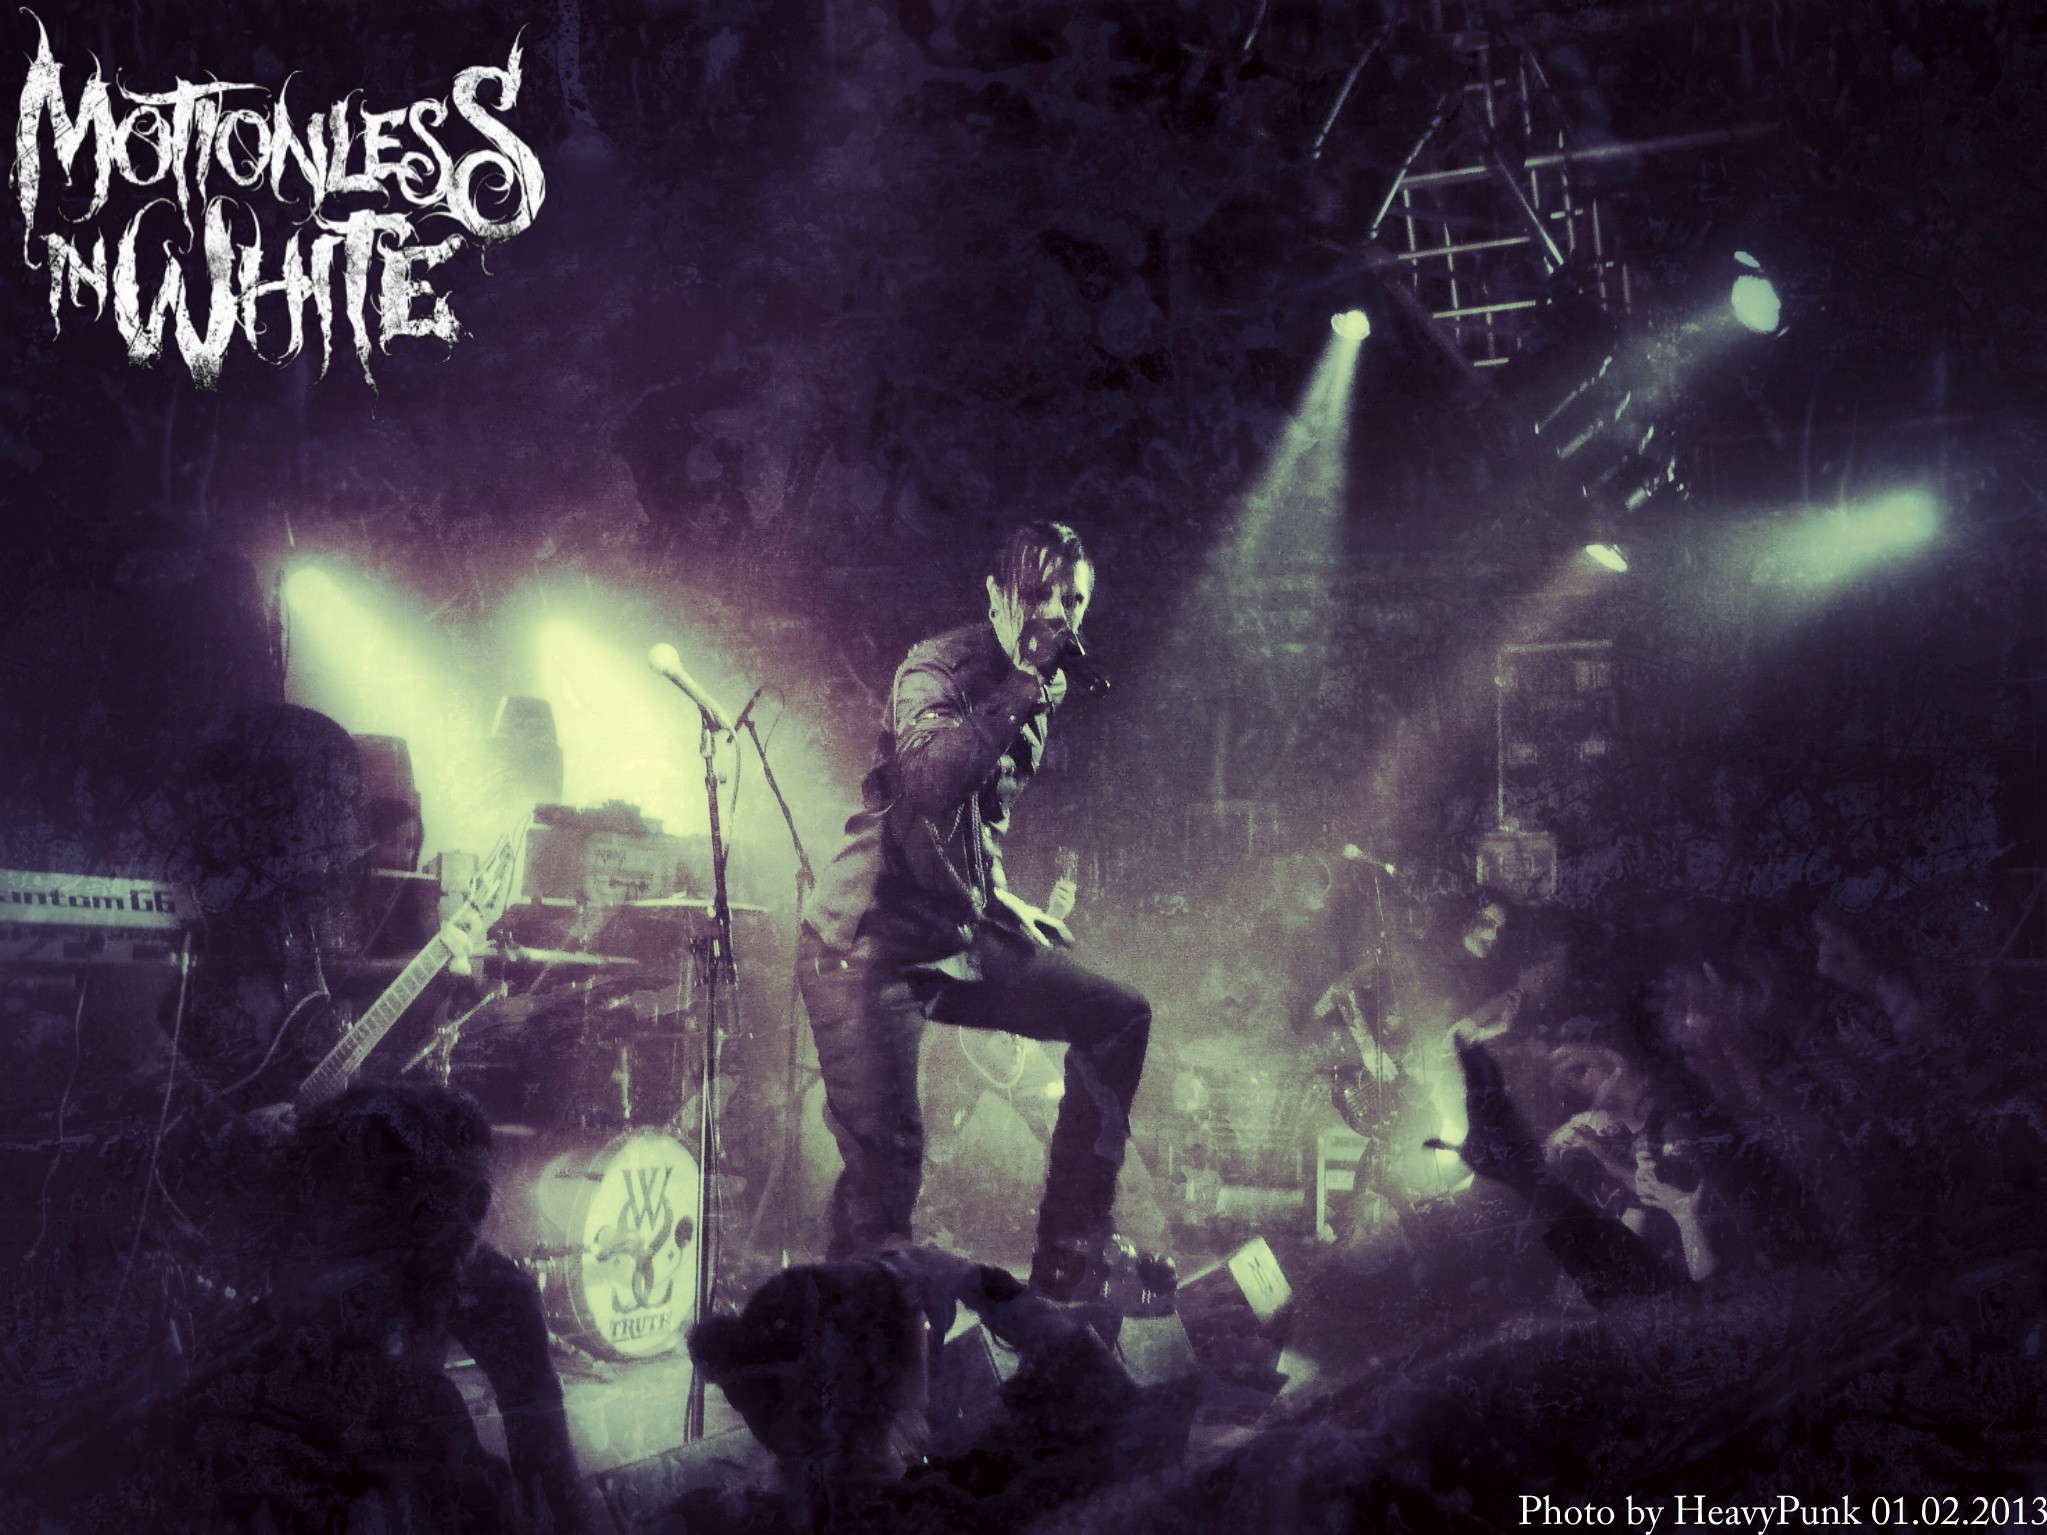 Motionless in White live in concert by MaxiMotionless on DeviantArt